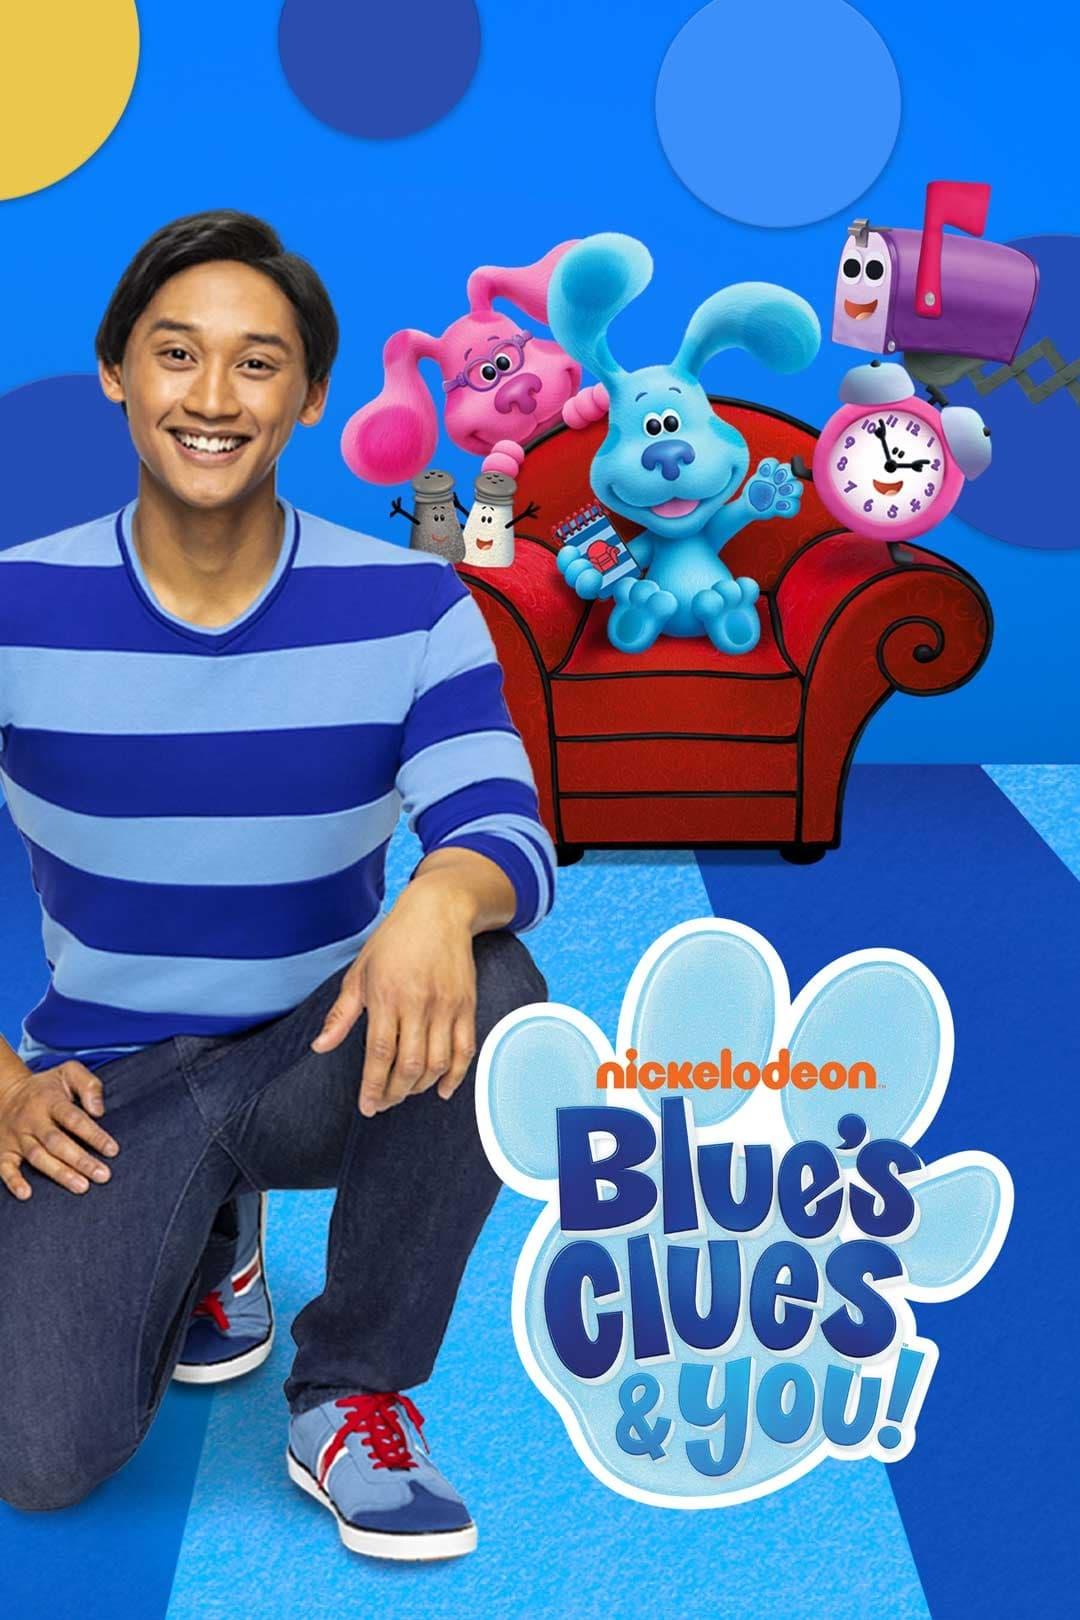 Blue's Clues & You! poster